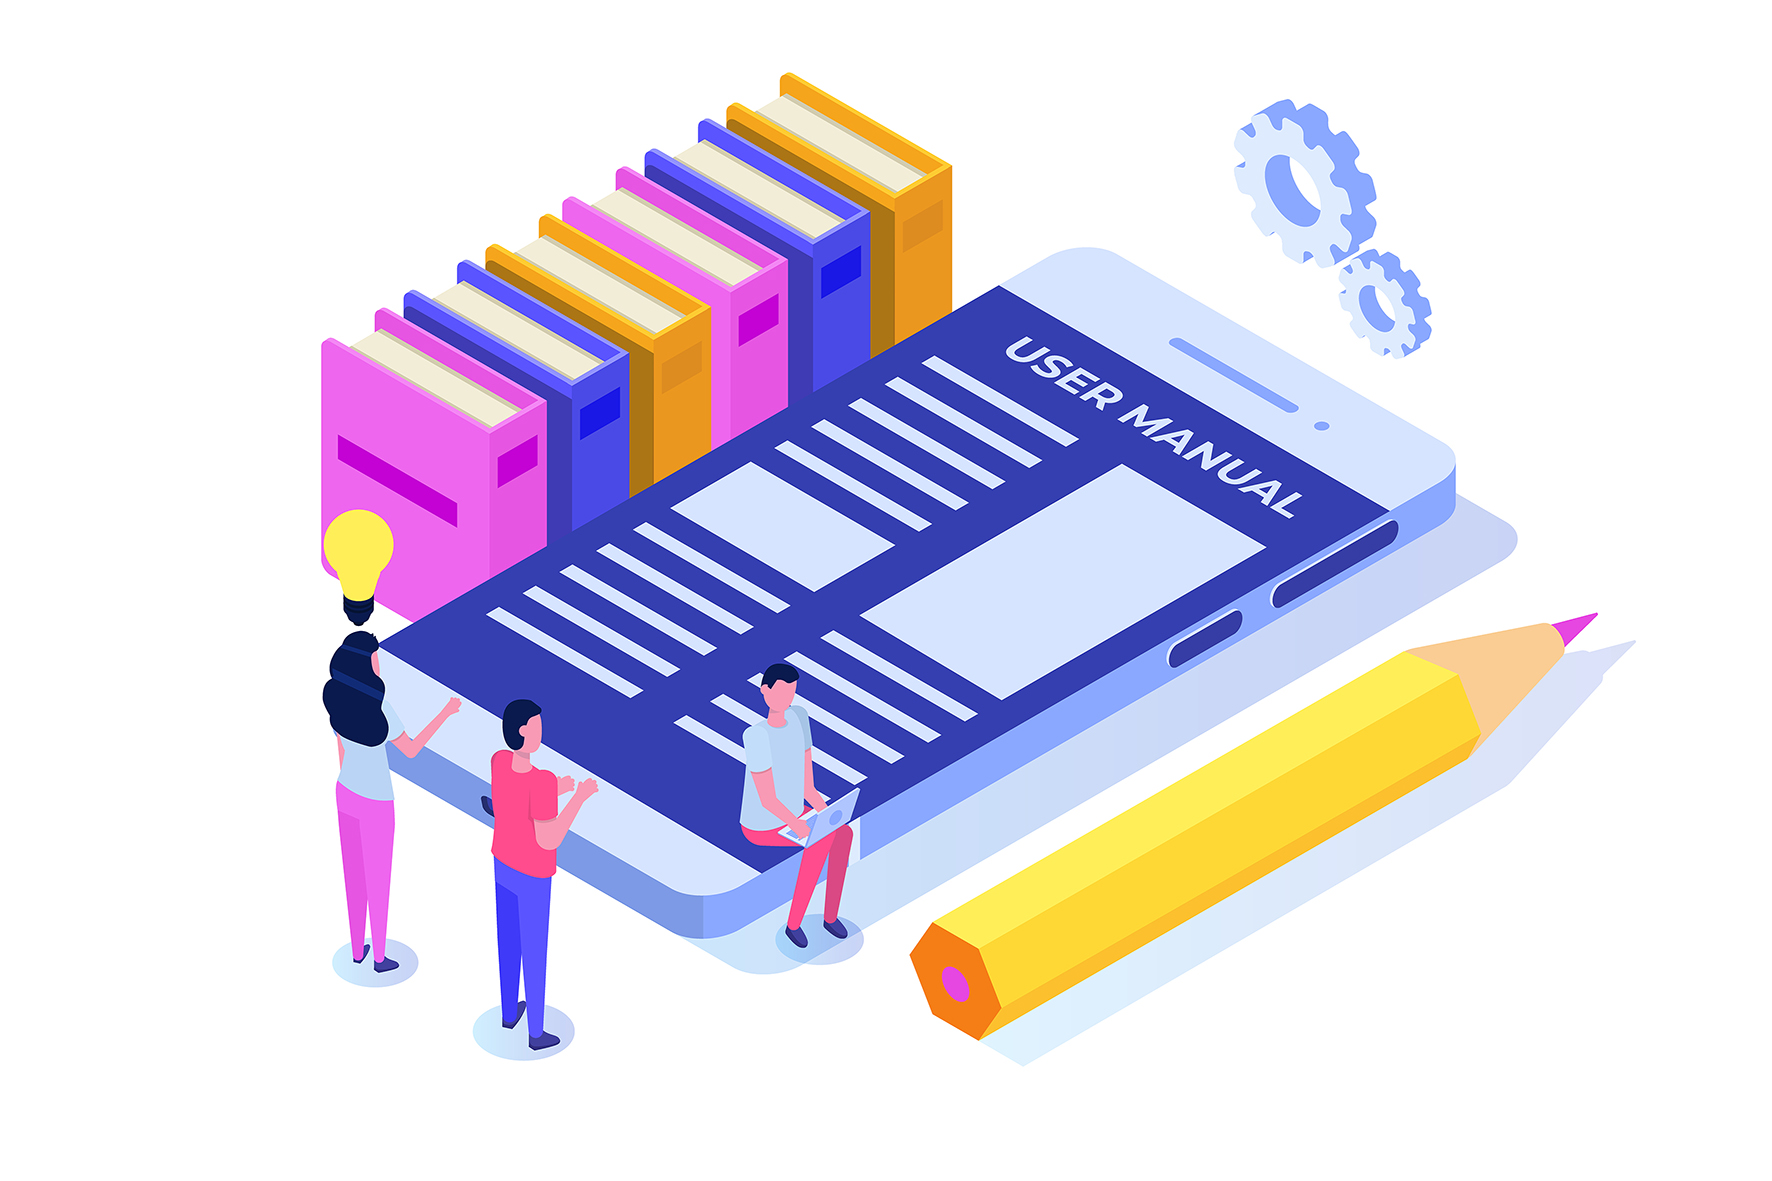 User manual  isometric concept. People with guide instruction are discussing about content of handbook. Vector illustration.